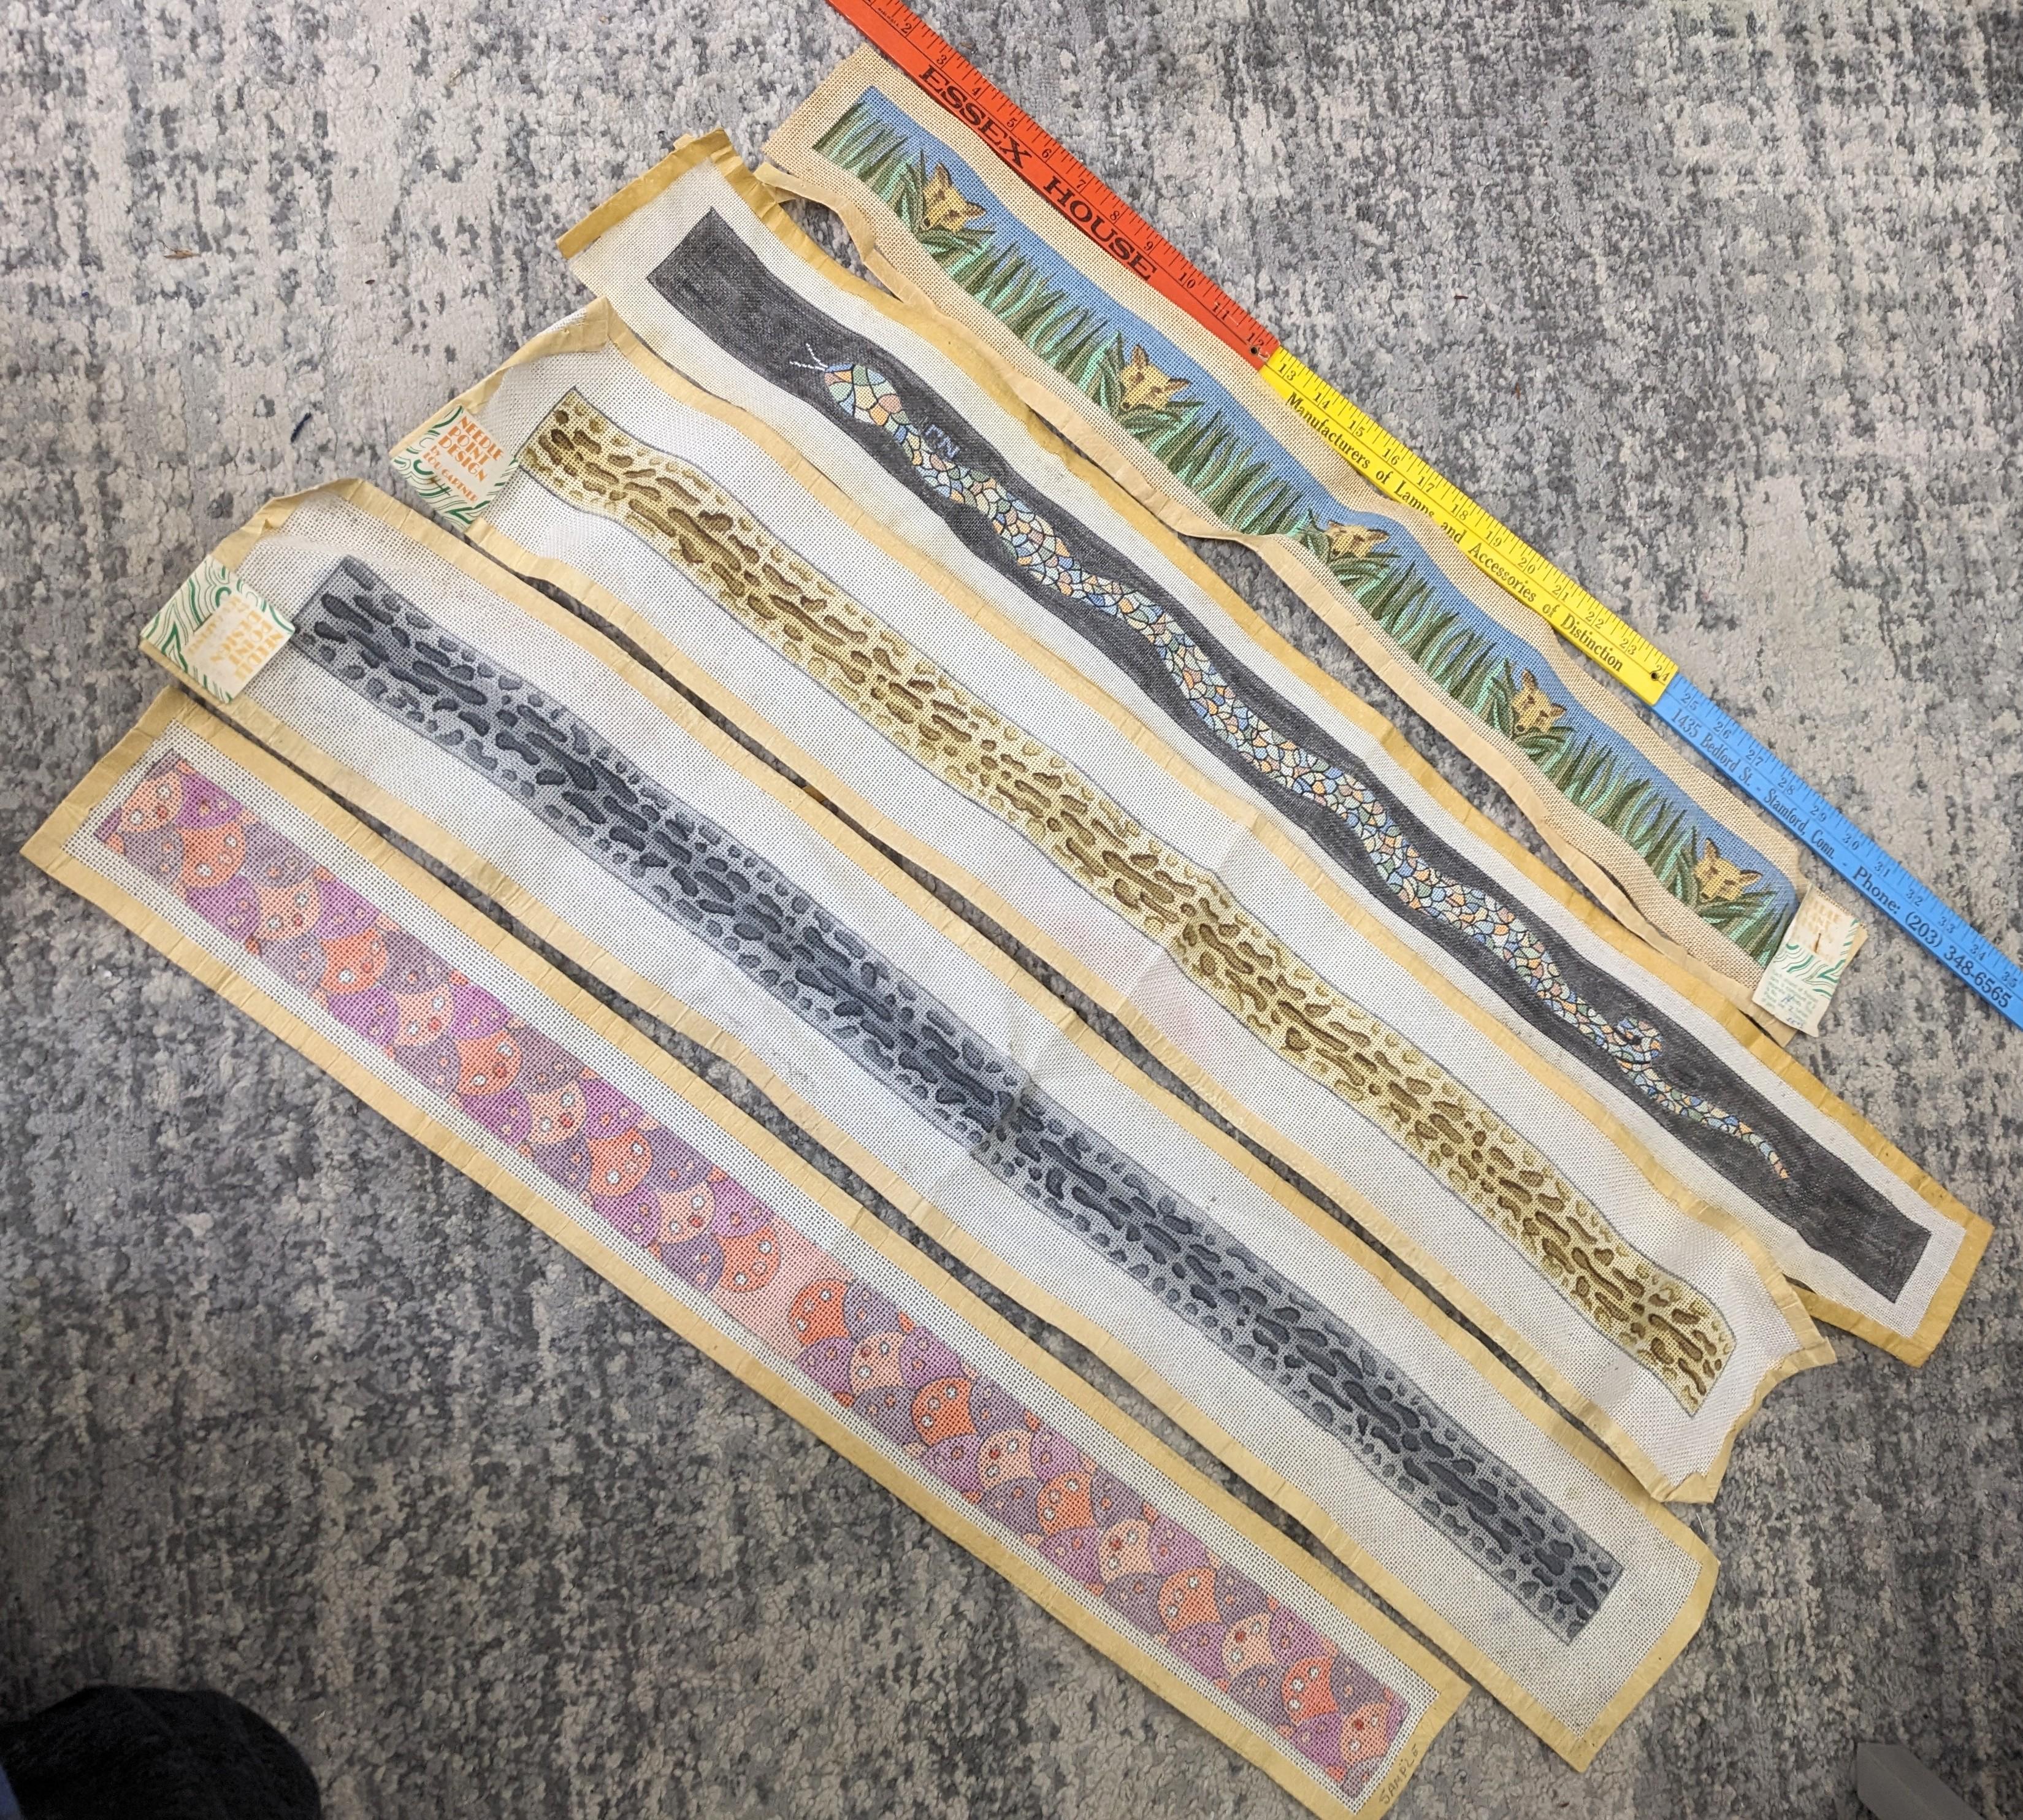 Hand painted Lou Gartner Needlepoint Blanks, Belts/Straps from the 1960s-70s from his estate. The longer ones are likely belts or pulls and the shorter ones (4 pcs) are straps for luggage racks (which require 2). 1970's USA.